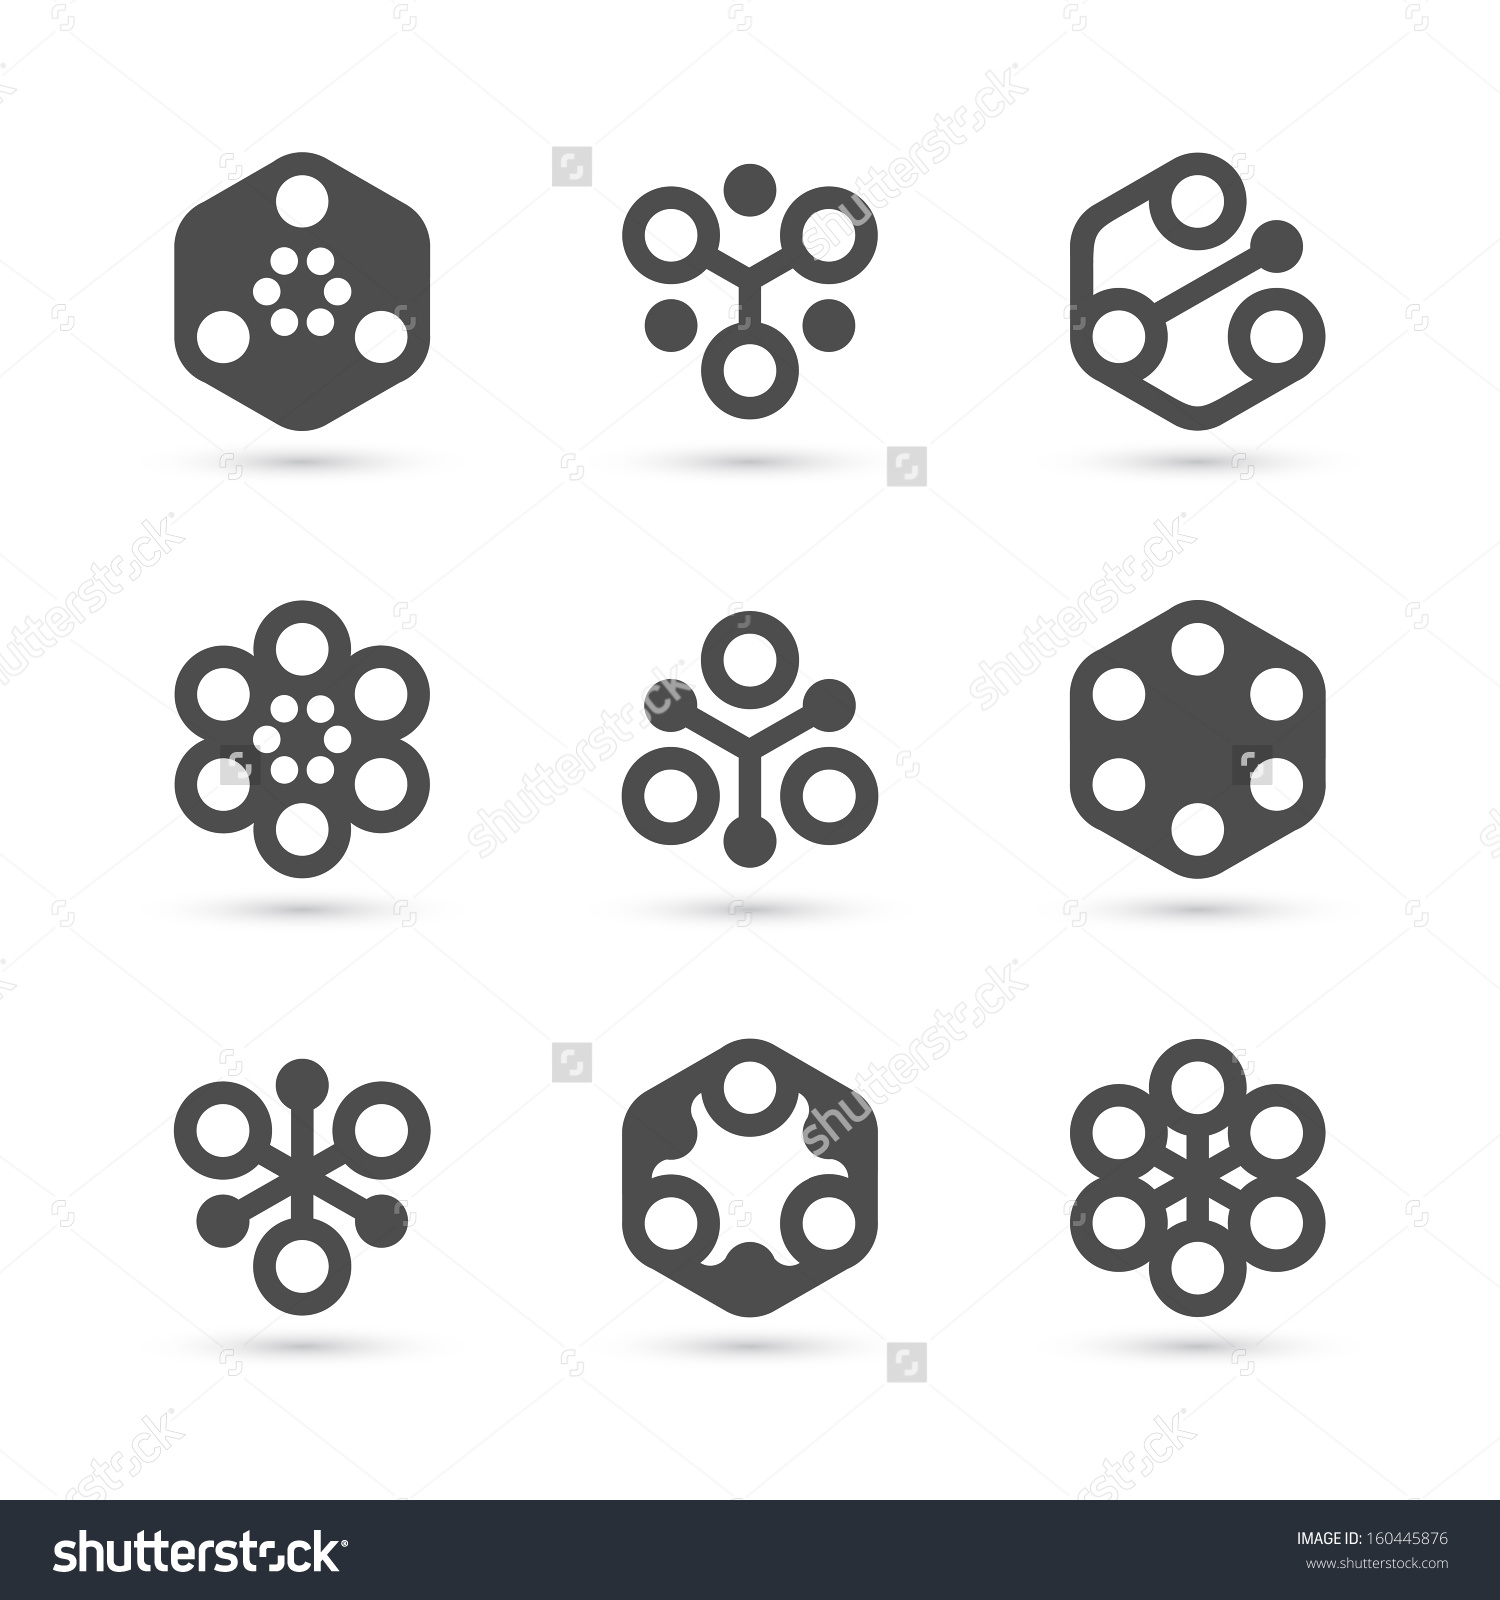 ABSTRACT ELEMENT ICON Logo Template photo - 1